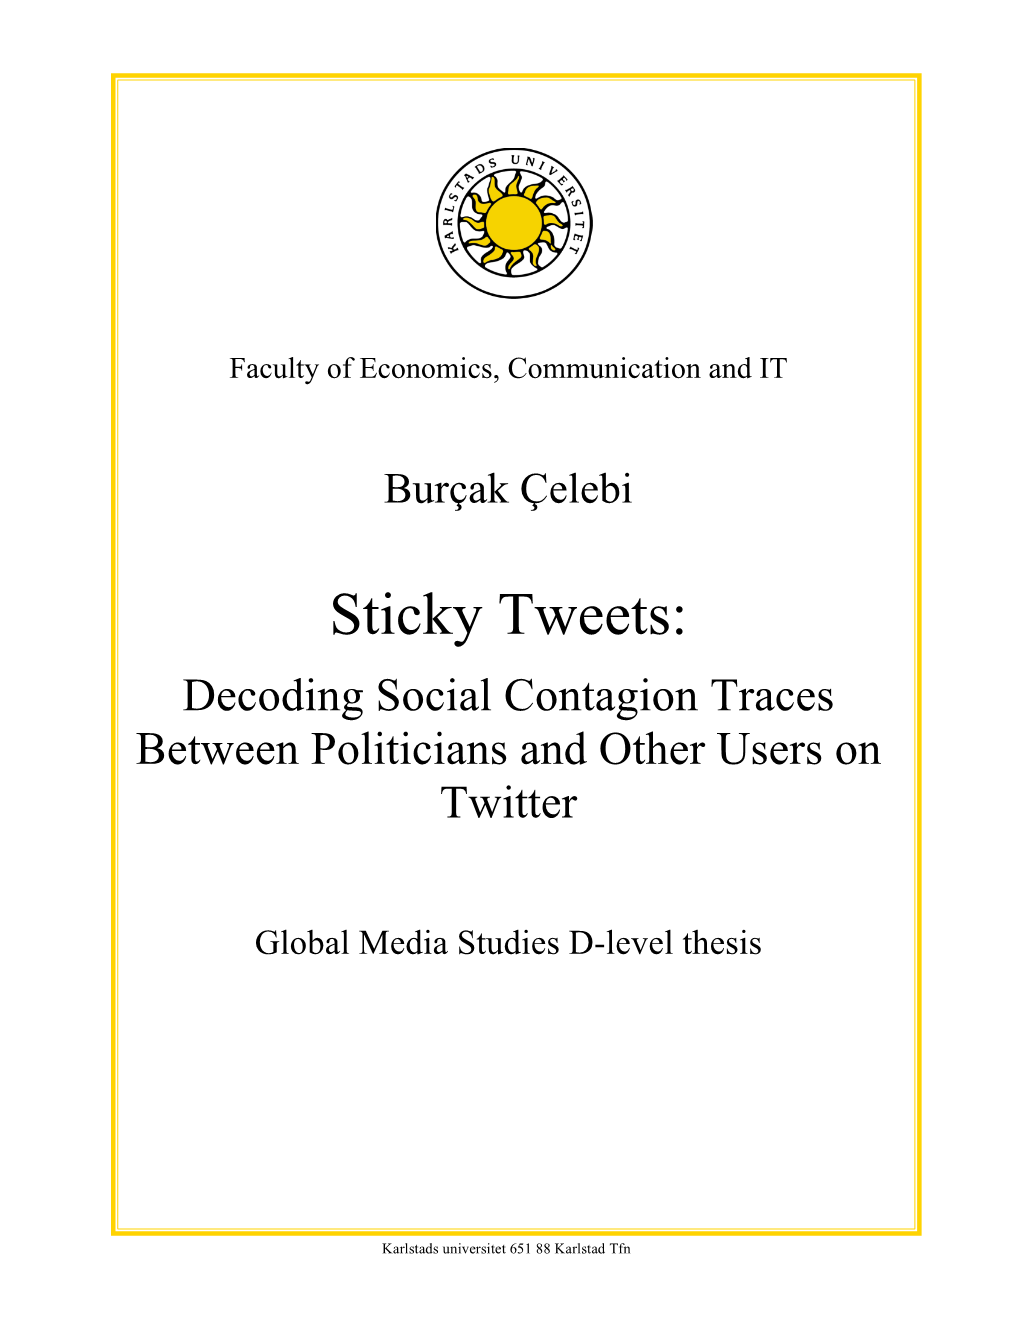 Sticky Tweets: Decoding Social Contagion Traces Between Politicians and Other Users on Twitter